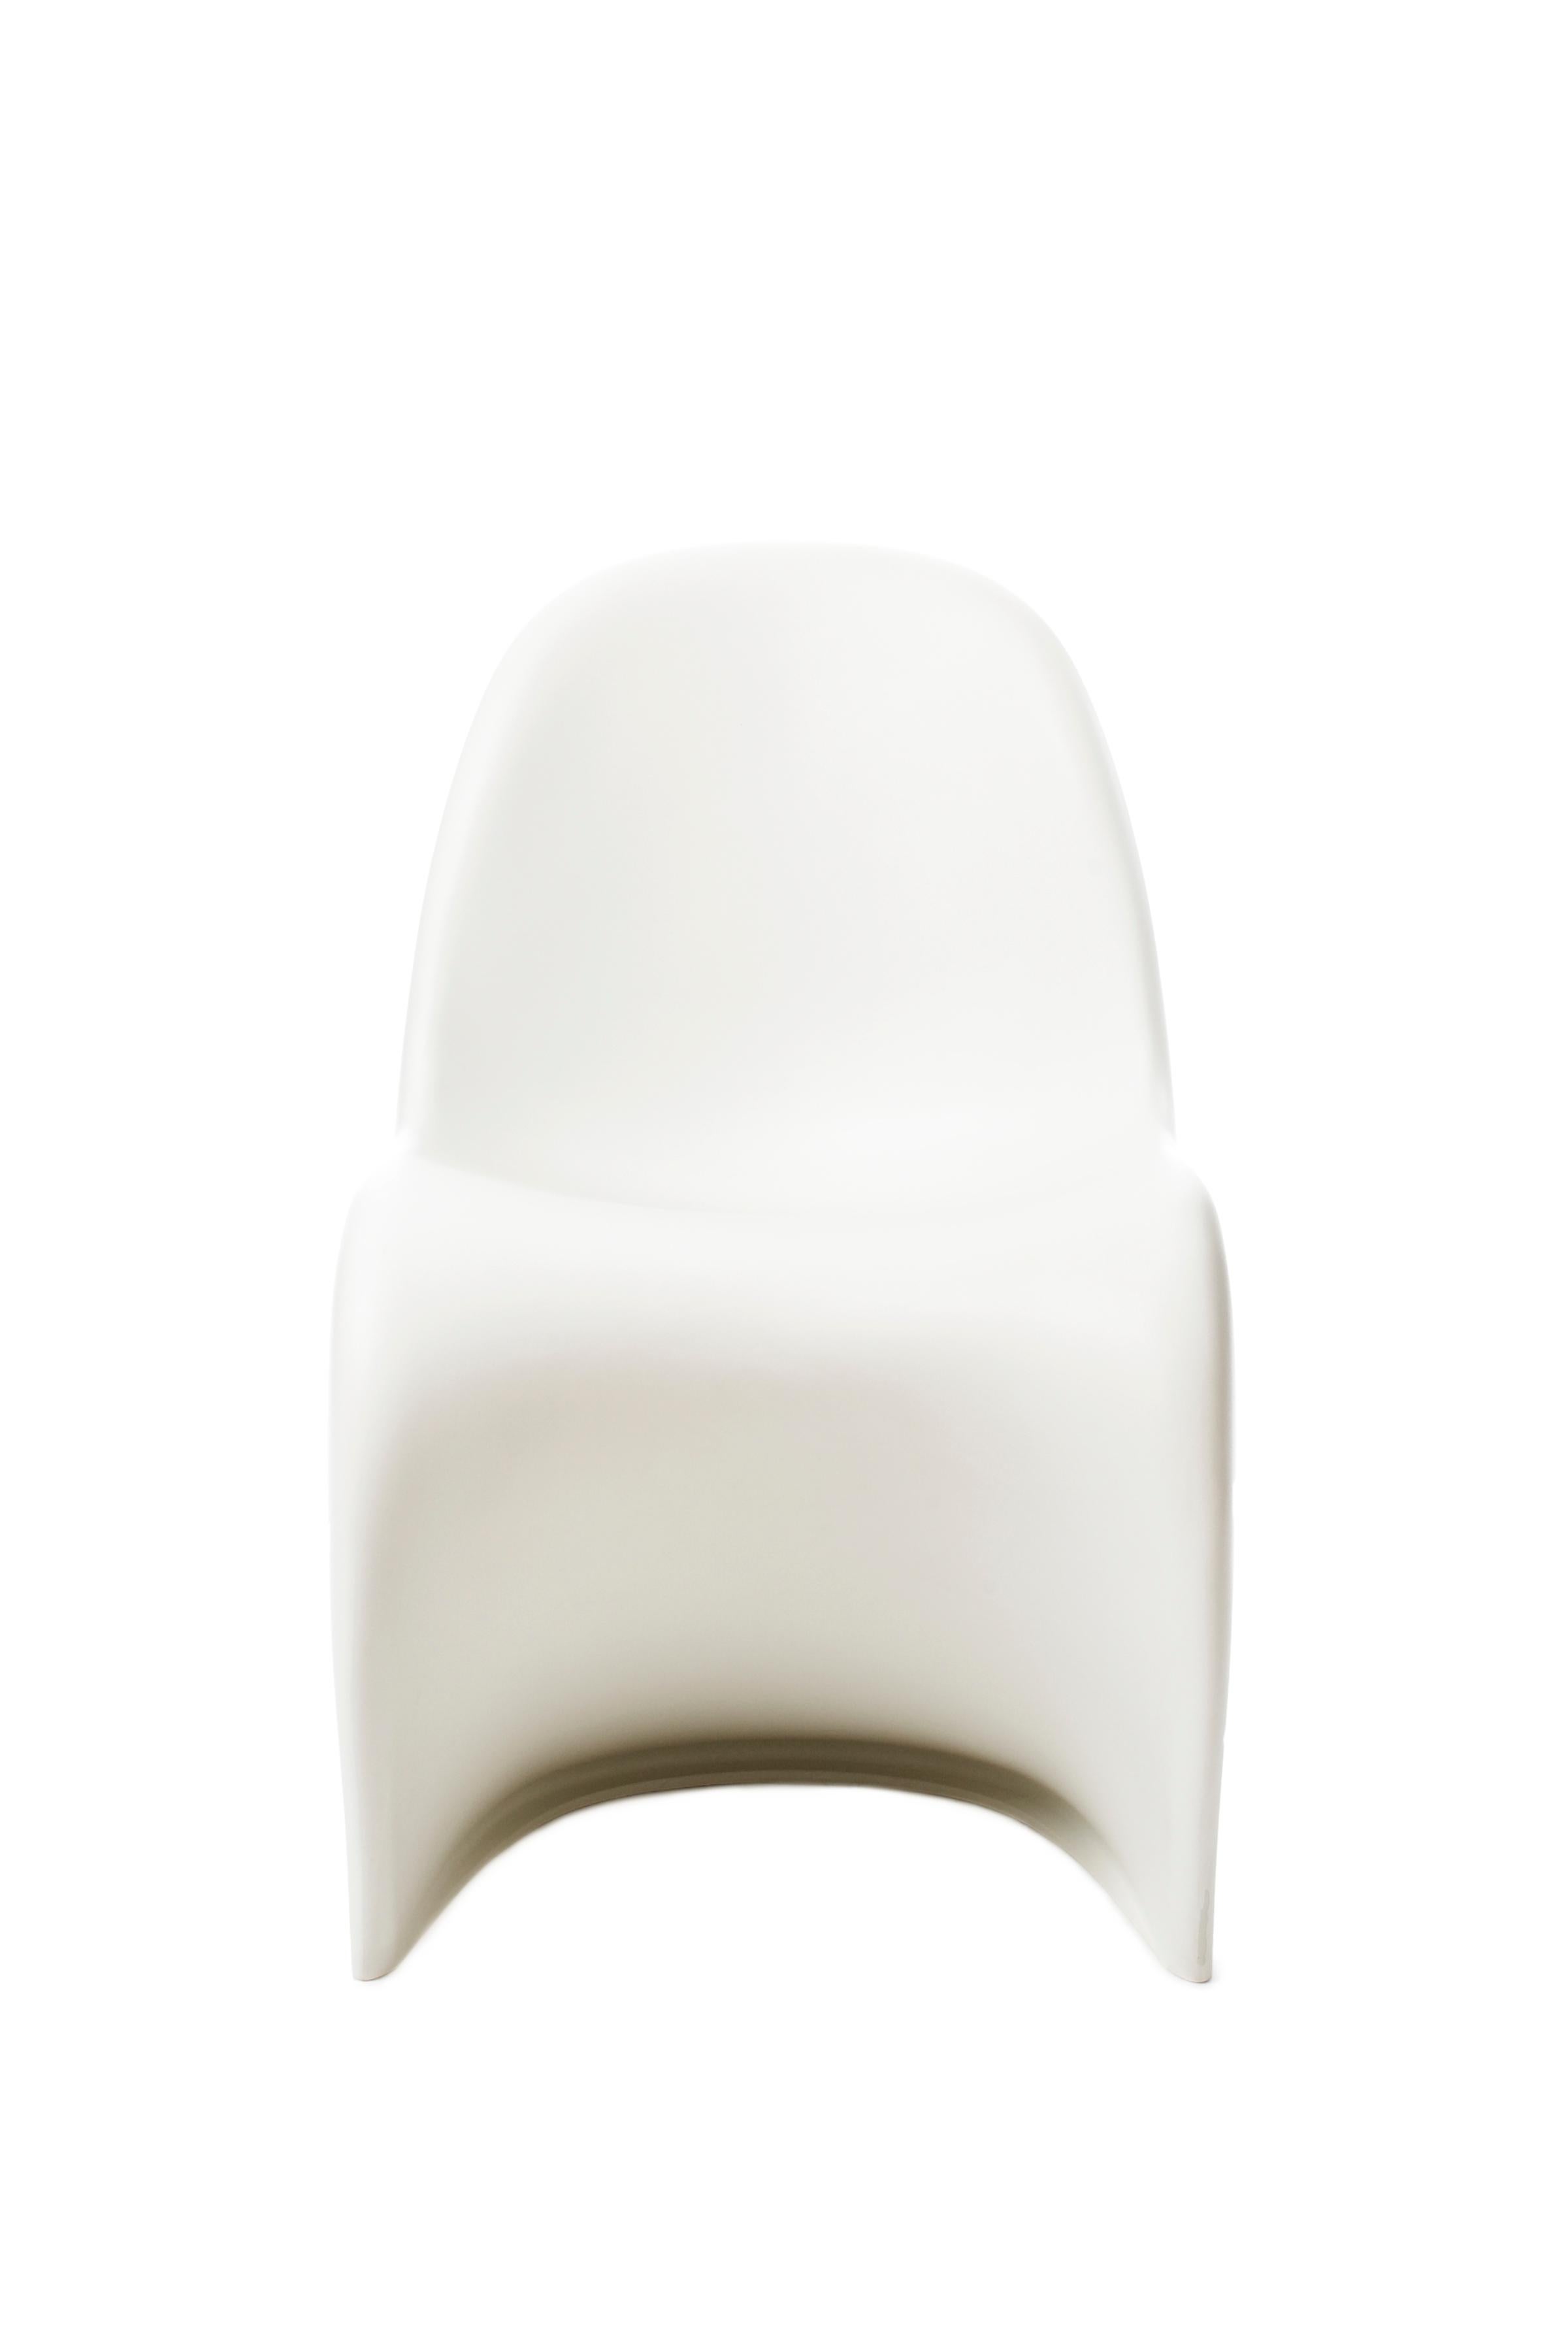 These items are currently only available in the United States.

Conceived by Verner Panton in 1960, the Panton chair was developed for serial production in collaboration with Vitra (1967). Today, the all-plastic chair is an icon of 20th century